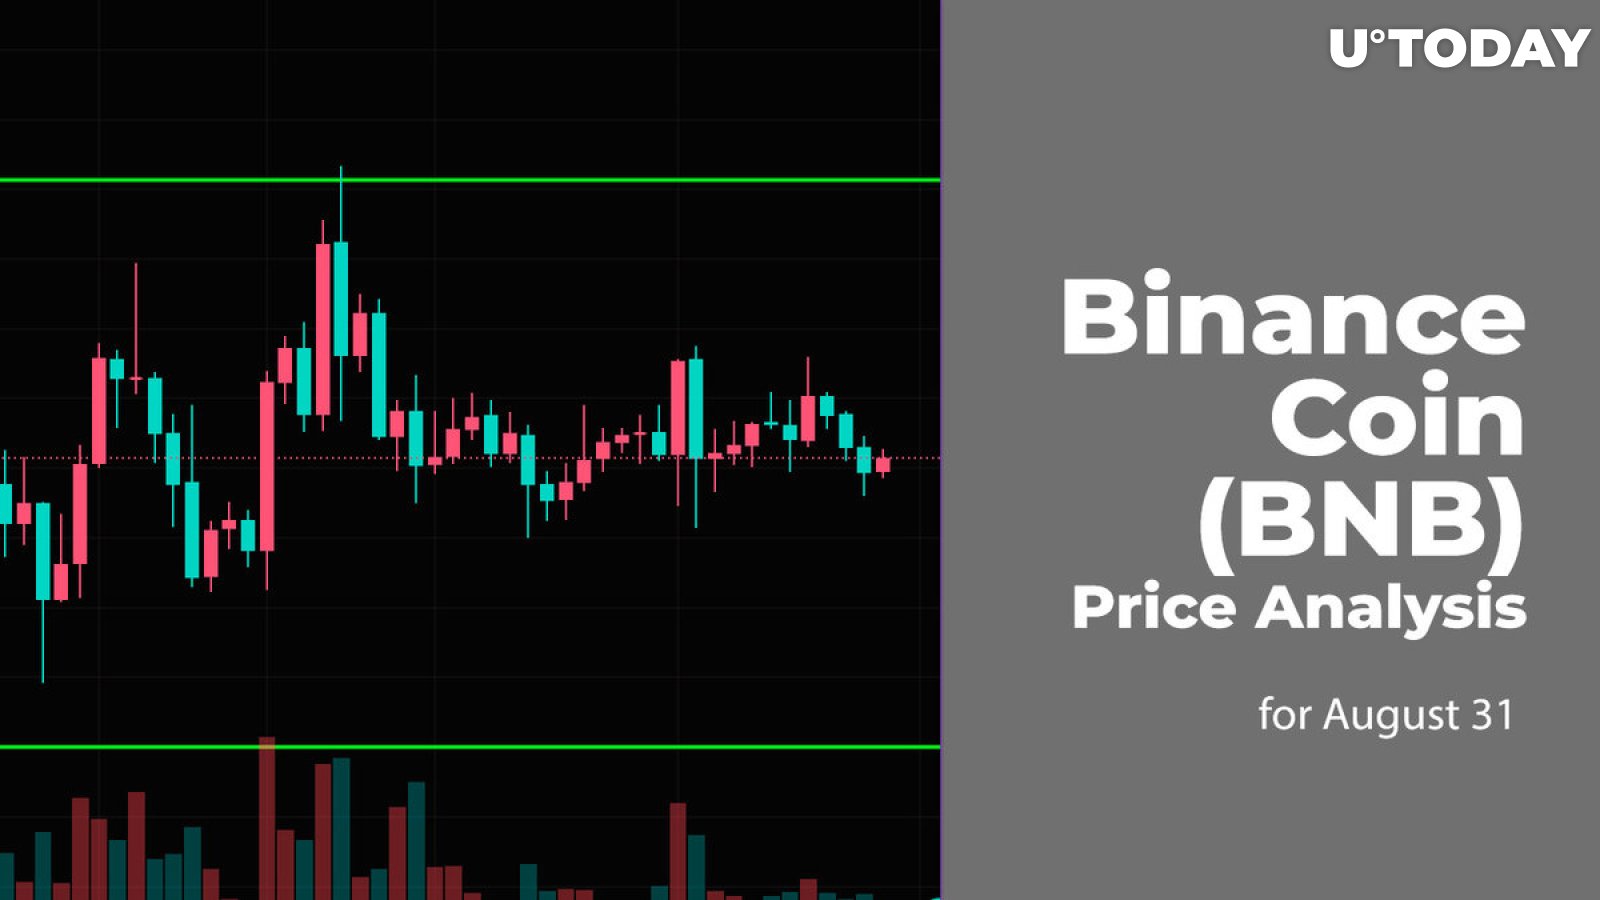 Binance Coin (BNB) Price Analysis for August 31